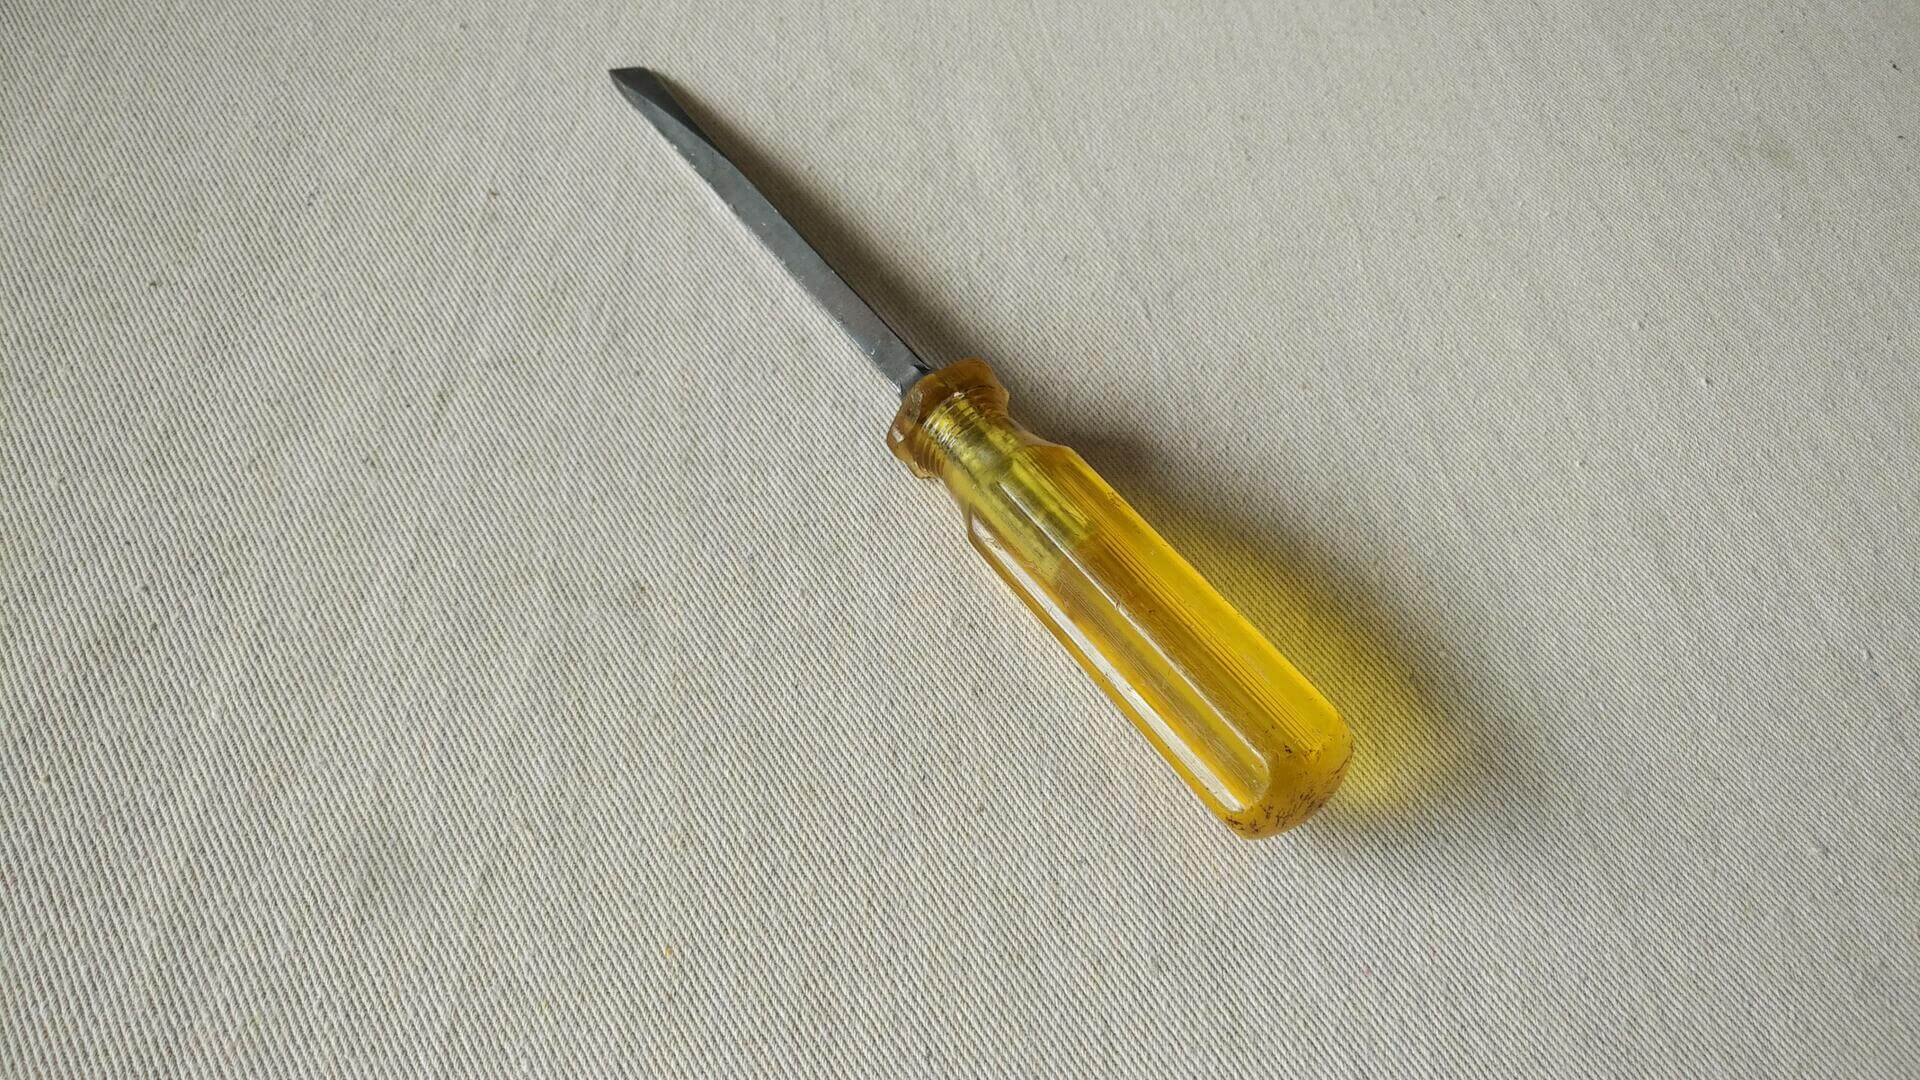 Gray No 606 heavy duty slotted screwdriver with square shaft and unbreakable yellow handle 9 1/2" long. Vintage made in Canada collectible hand tools